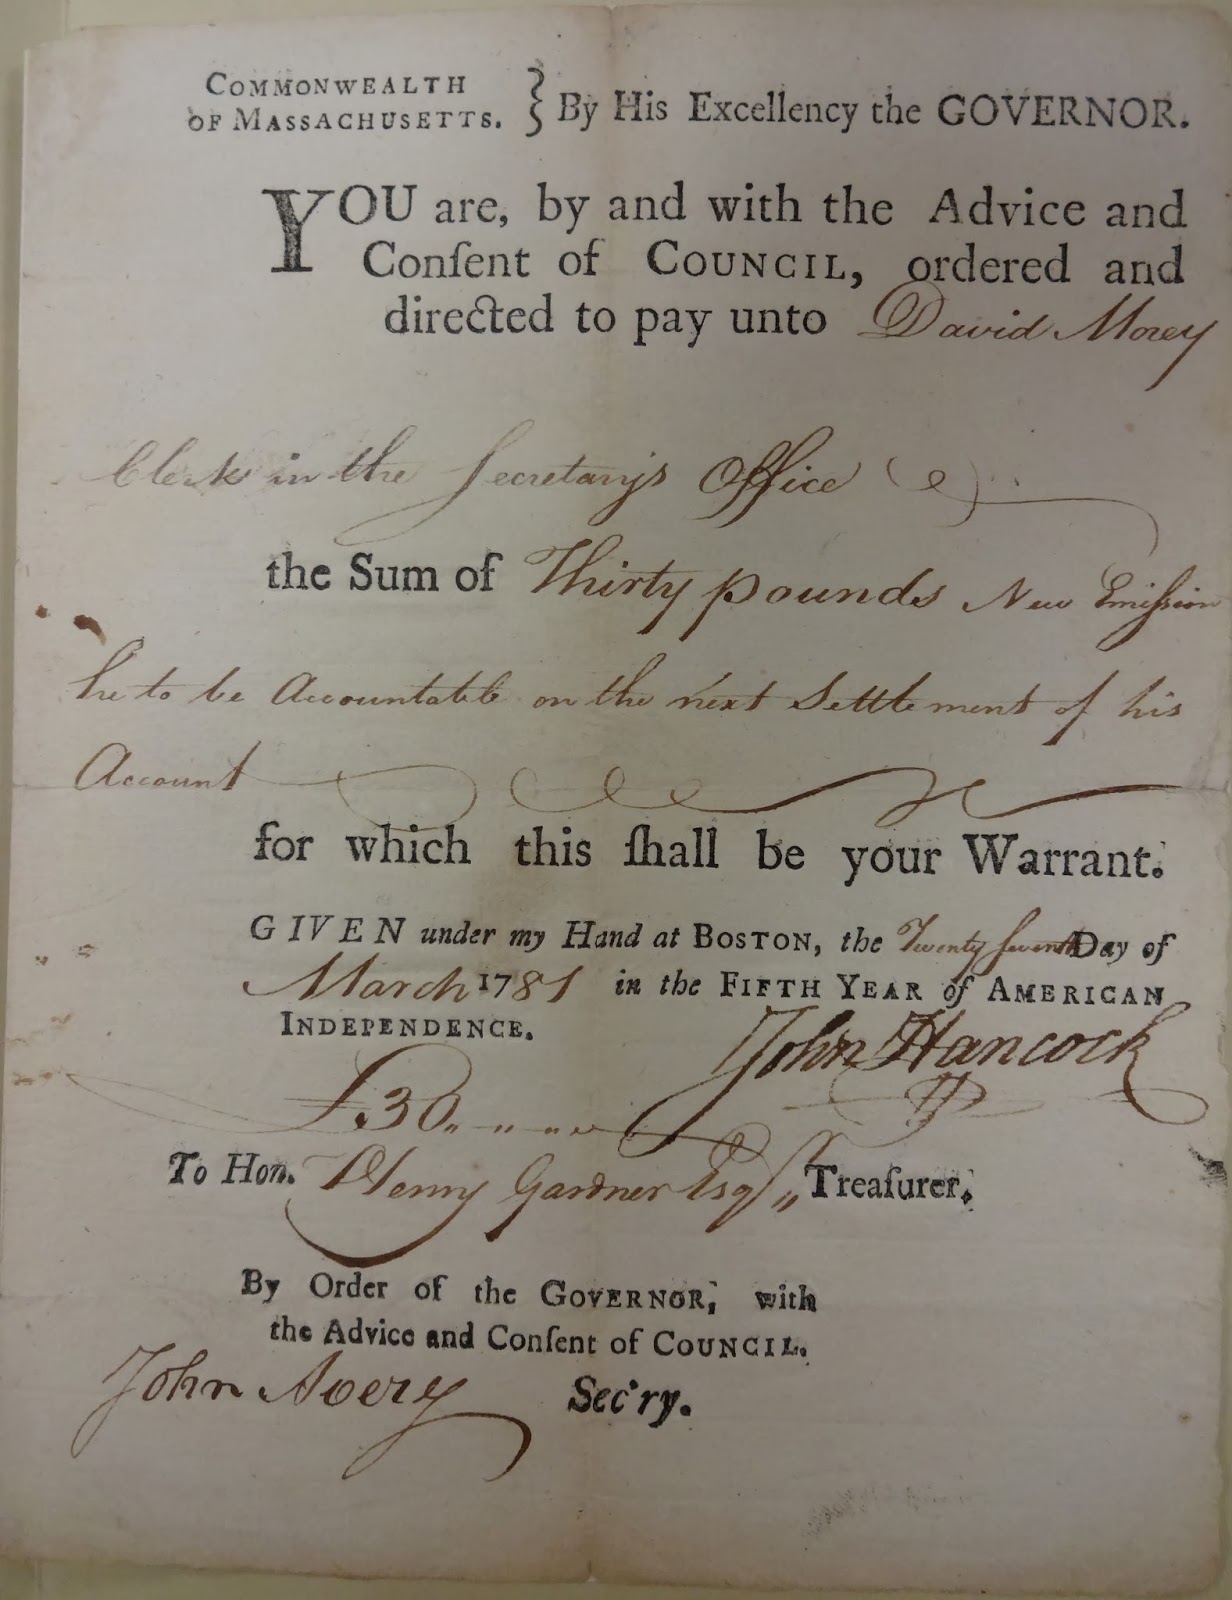 Government document fining an individual, signed by John Avery